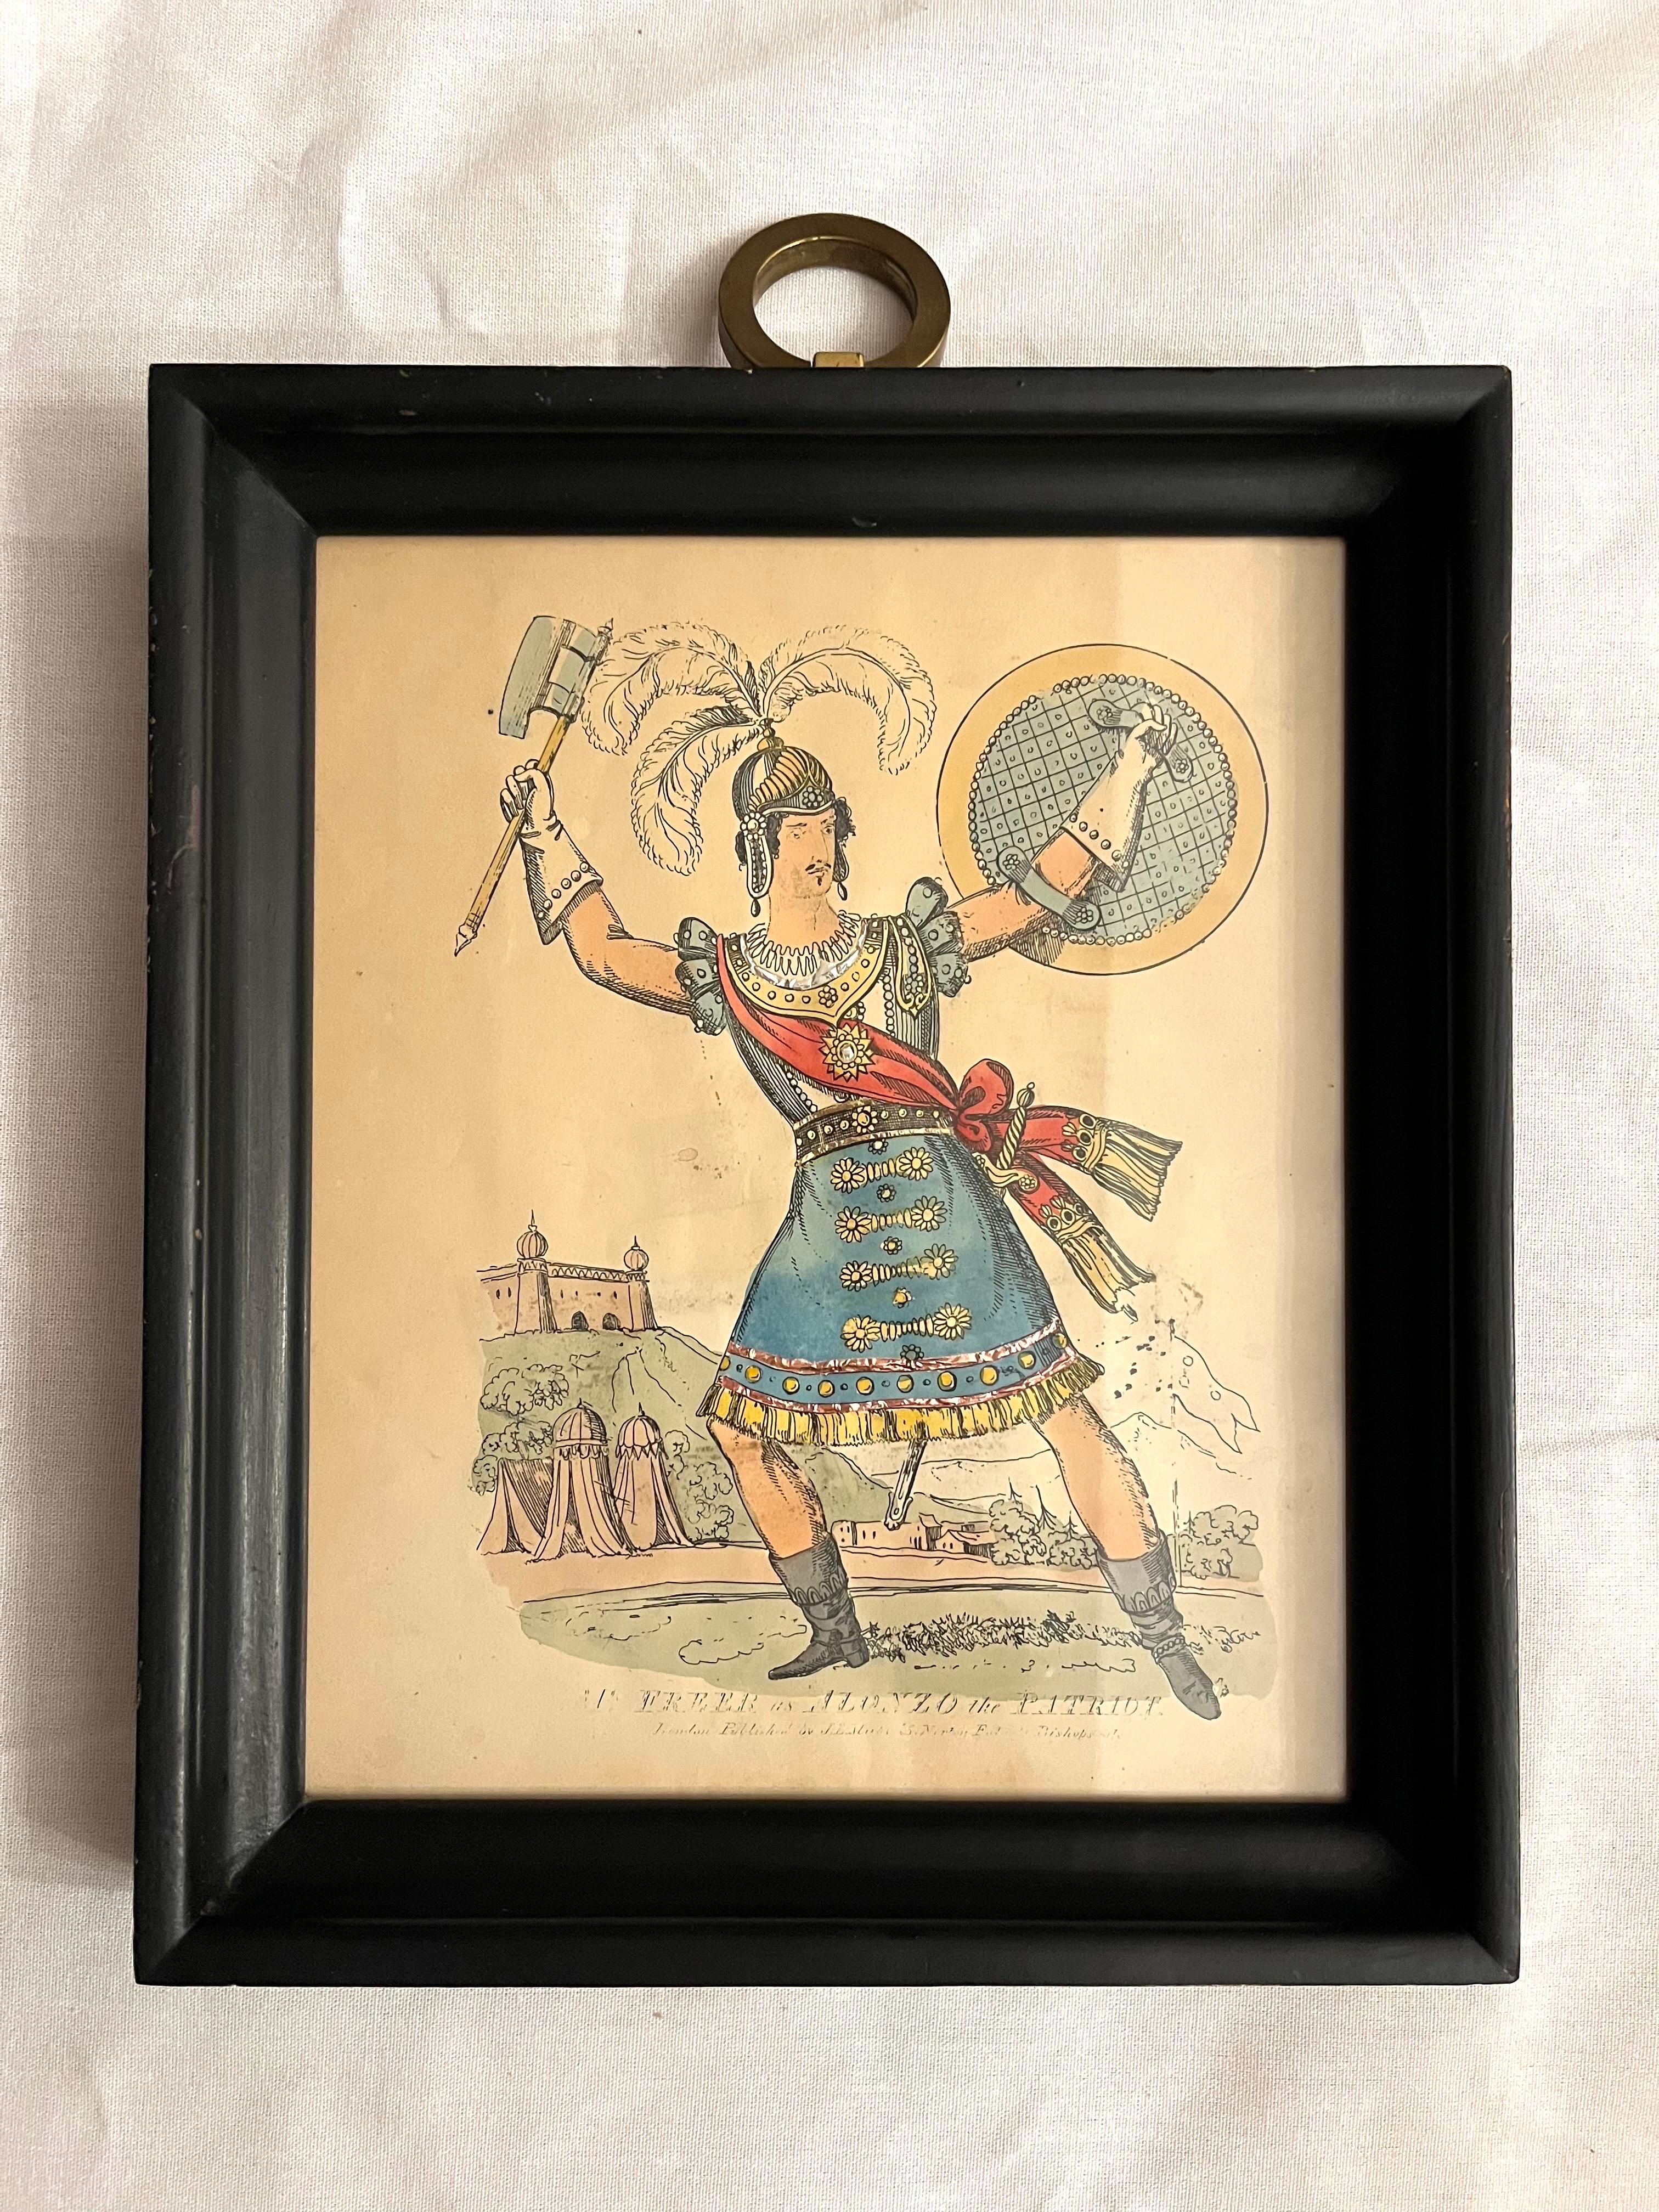 A mid 19th century English full length portrait tinsel print hand colored and hand embellished, framed and retailed by Saxon and Clemens of New York City circa mid 20th century. This print depicts, 